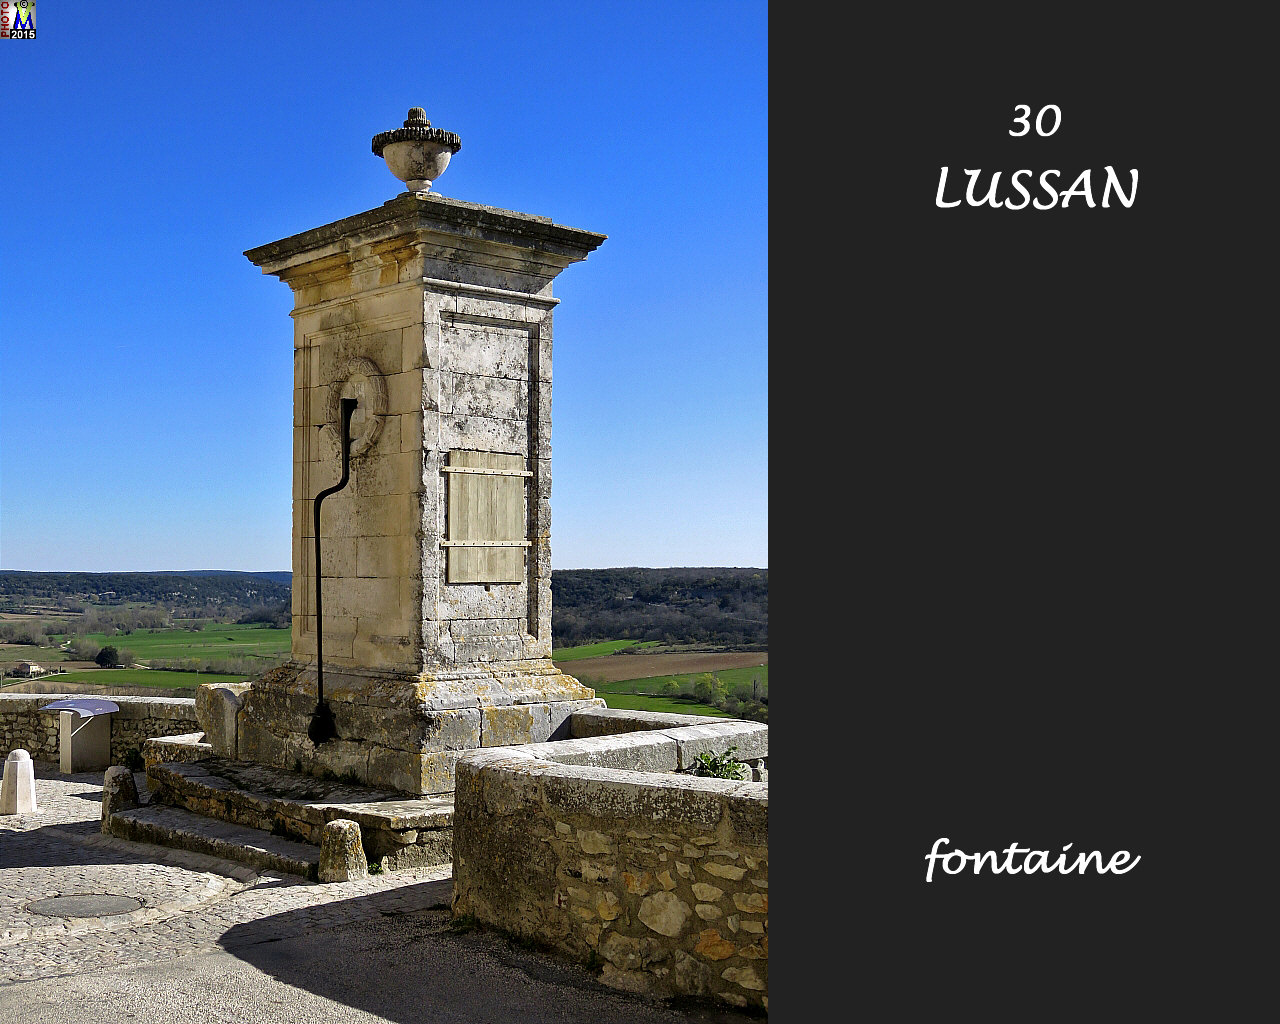 30LUSSAN_fontaine_100.jpg